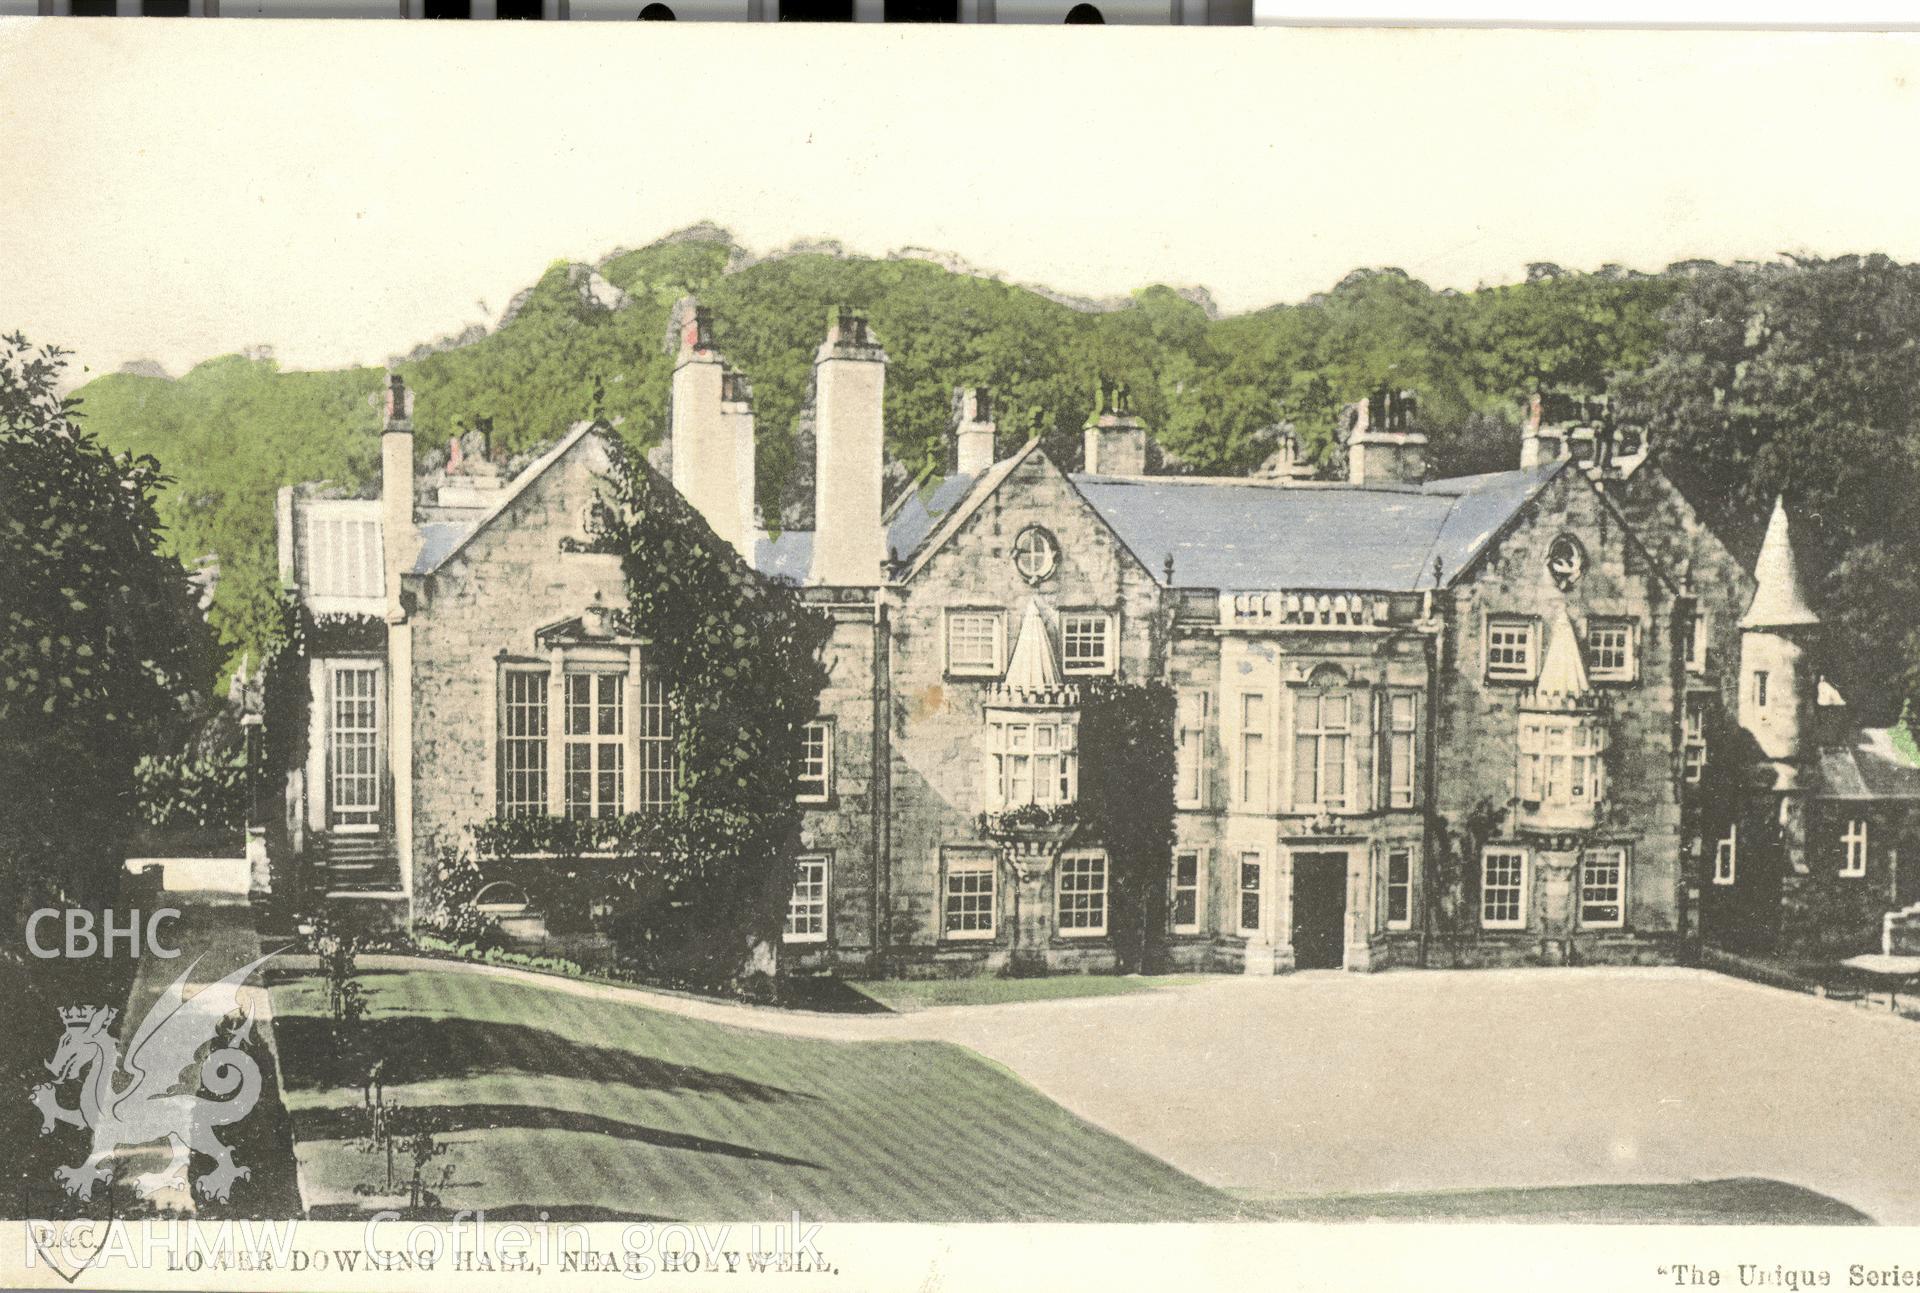 Digitised postcard image of Downing Hall, The Unique Series T.S.B. & C. Produced by Parks and Gardens Data Services, from an original item in the Peter Davis Collection at Parks and Gardens UK. We hold only web-resolution images of this collection, suitable for viewing on screen and for research purposes only. We do not hold the original images, or publication quality scans.